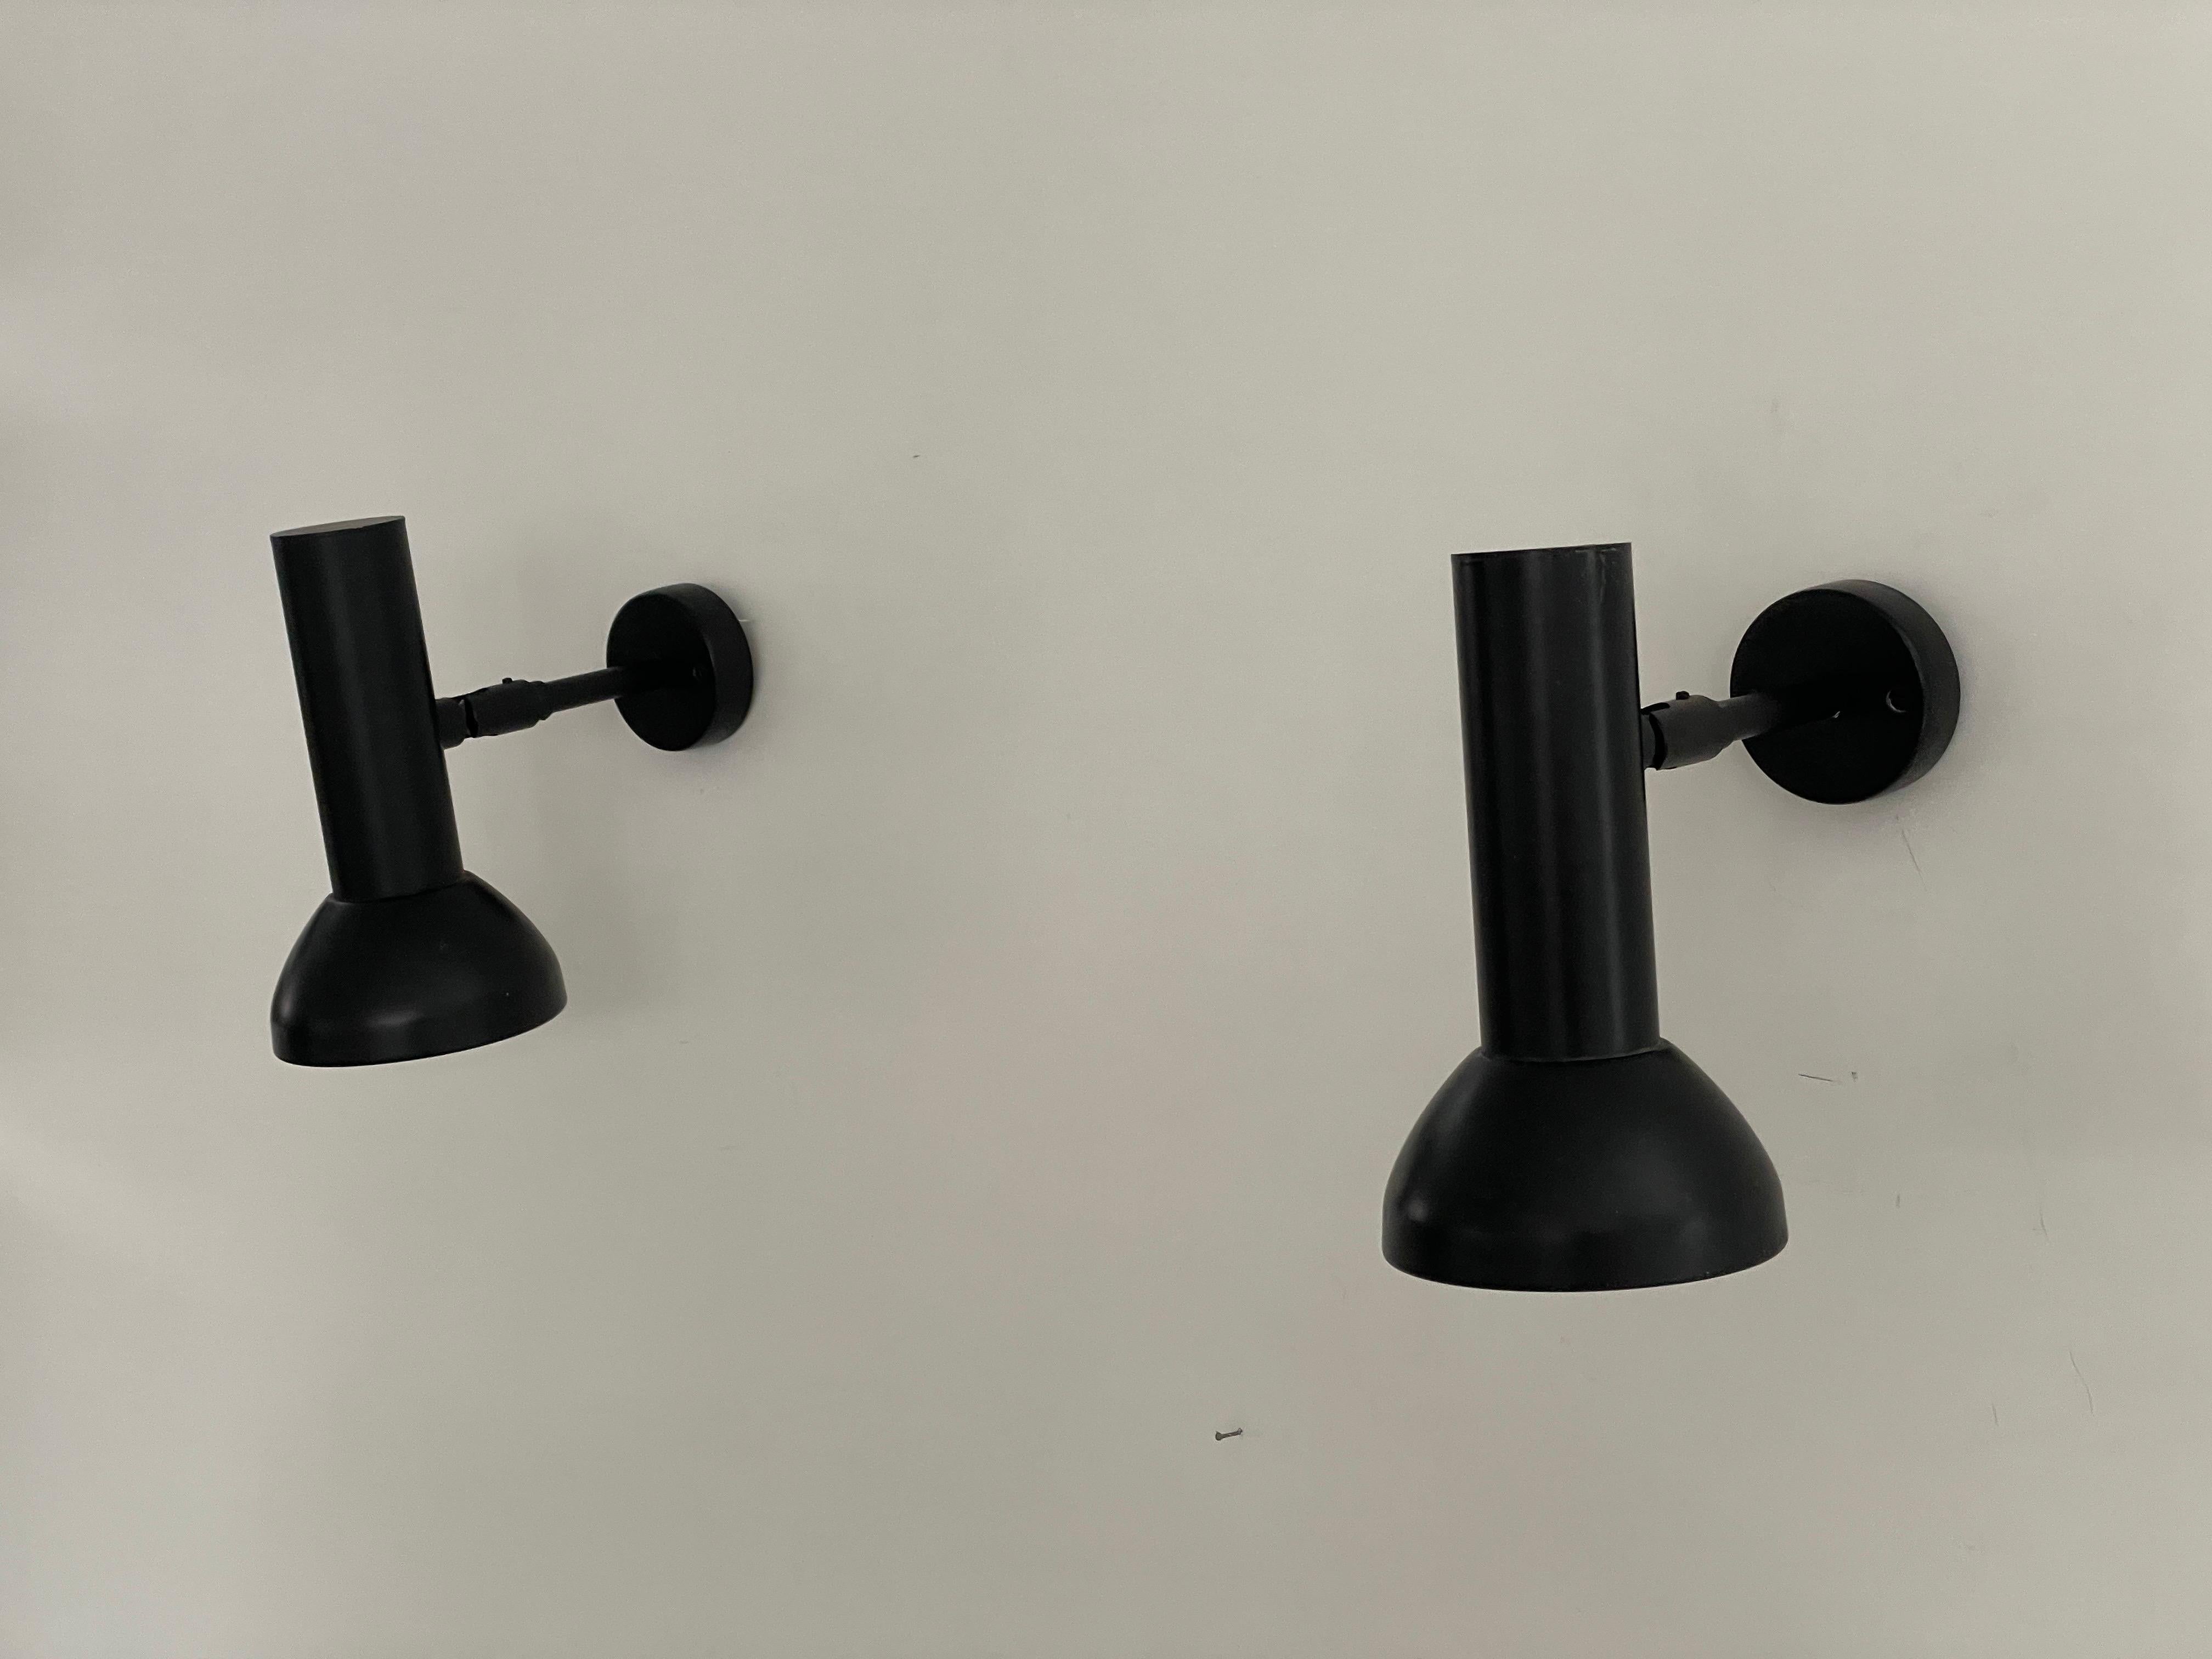 Mid-century Modern Black Pair of Sconces by Cosack Leuchten, 1960s, Germany

Very elegant and Minimalist  Black wall lamps
Lamp is in very good condition.

These lamps works with E14 standard light bulbs. 
Wired and suitable to use in all countries.